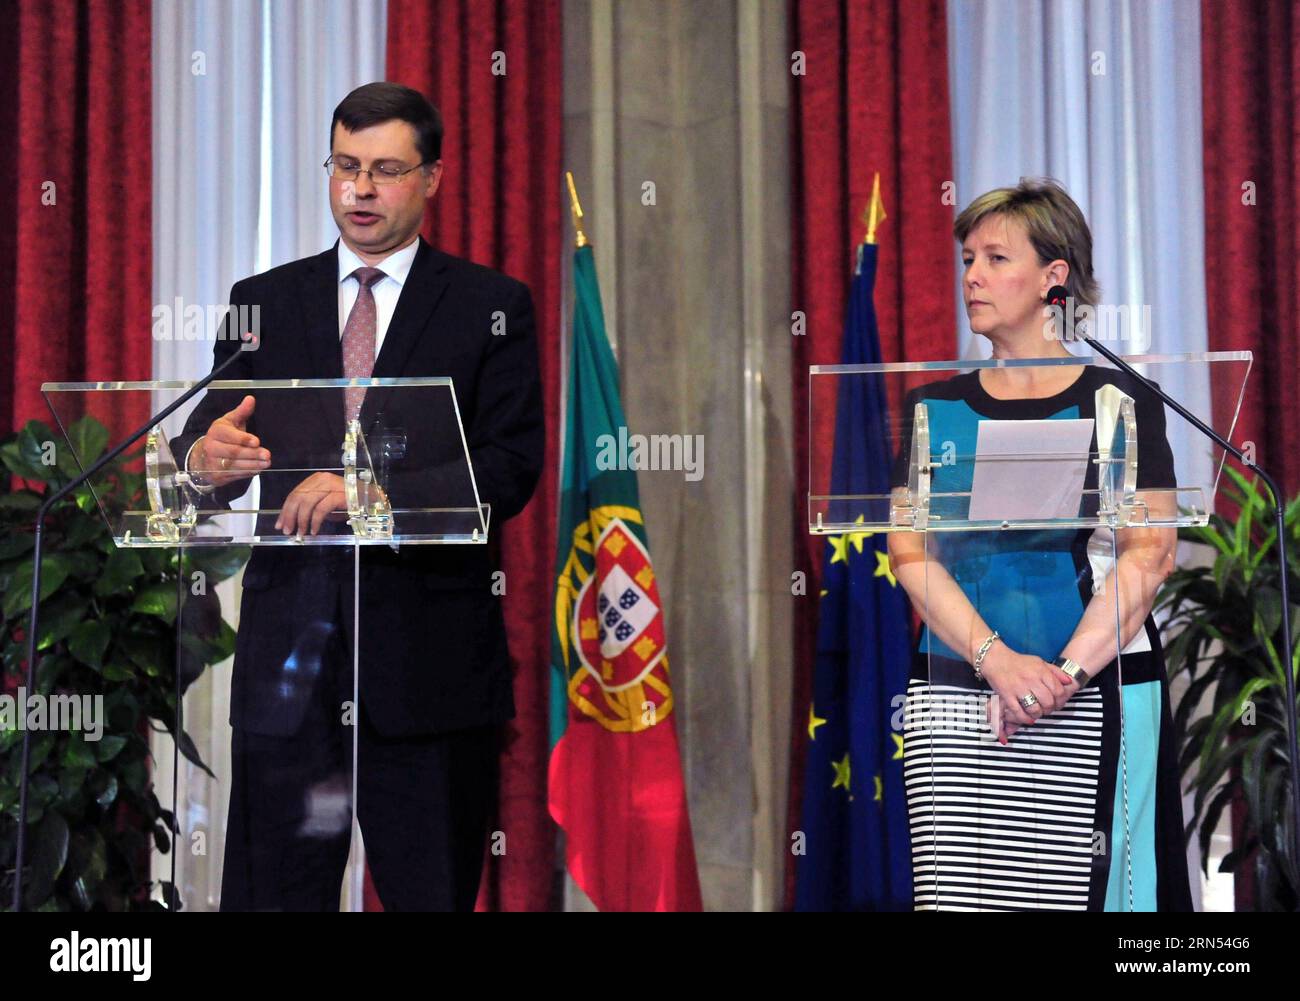 (150613) -- LISBON, June 12, 2015 -- Portuguese Minister of Finance Maria Luis Albuquerque (R) and visiting European Commission Vice-President Valdis Dombrovskis attend a joint press conference in Lisbon, Protugal, on June 12, 2015. Dombrovskis said here Friday that there would be dramatic consequences if adjustments to Portugal s pension system were not made soon. )(zhf) PORTUGAL-LISBON-EU-VISIT ZhangxLiyun PUBLICATIONxNOTxINxCHN   Lisbon June 12 2015 PORTUGUESE Ministers of Finance Mary Luis Albuquerque r and Visiting European Commission Vice President Valdis Dombrovskis attend a Joint Press Stock Photo